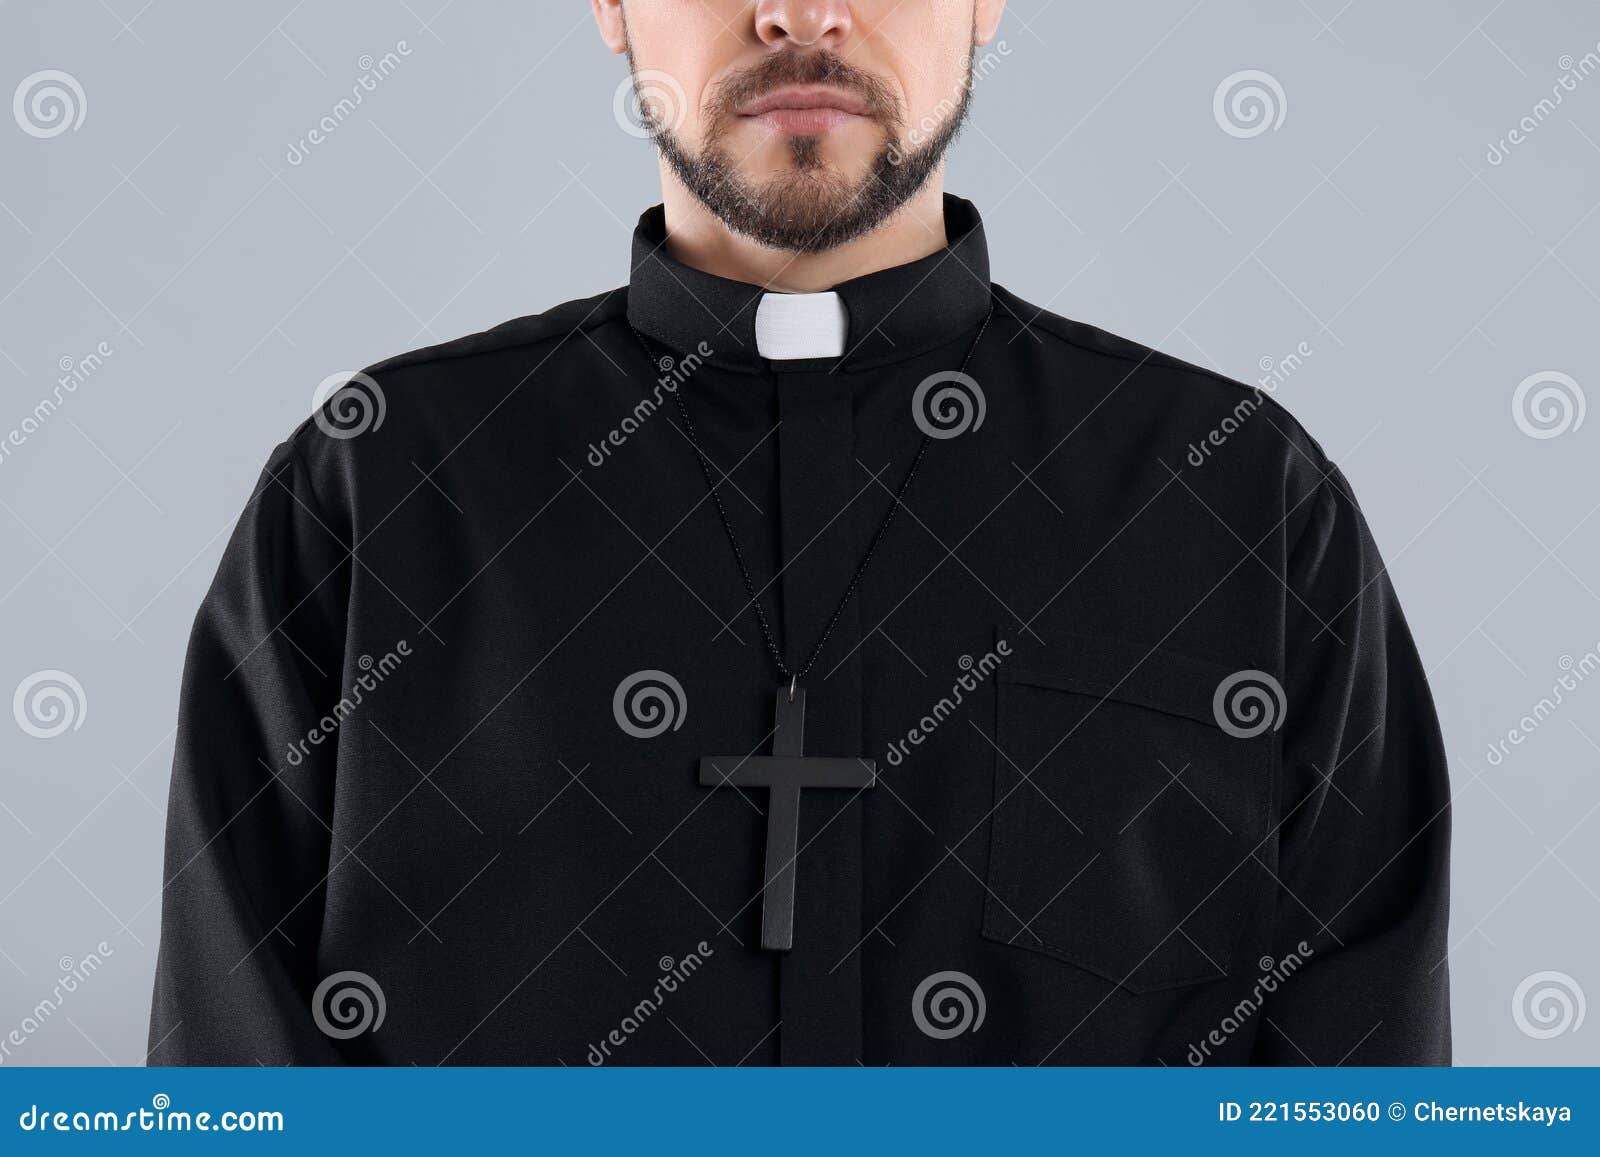 priest wearing cassock with clerical collar on grey, closeup